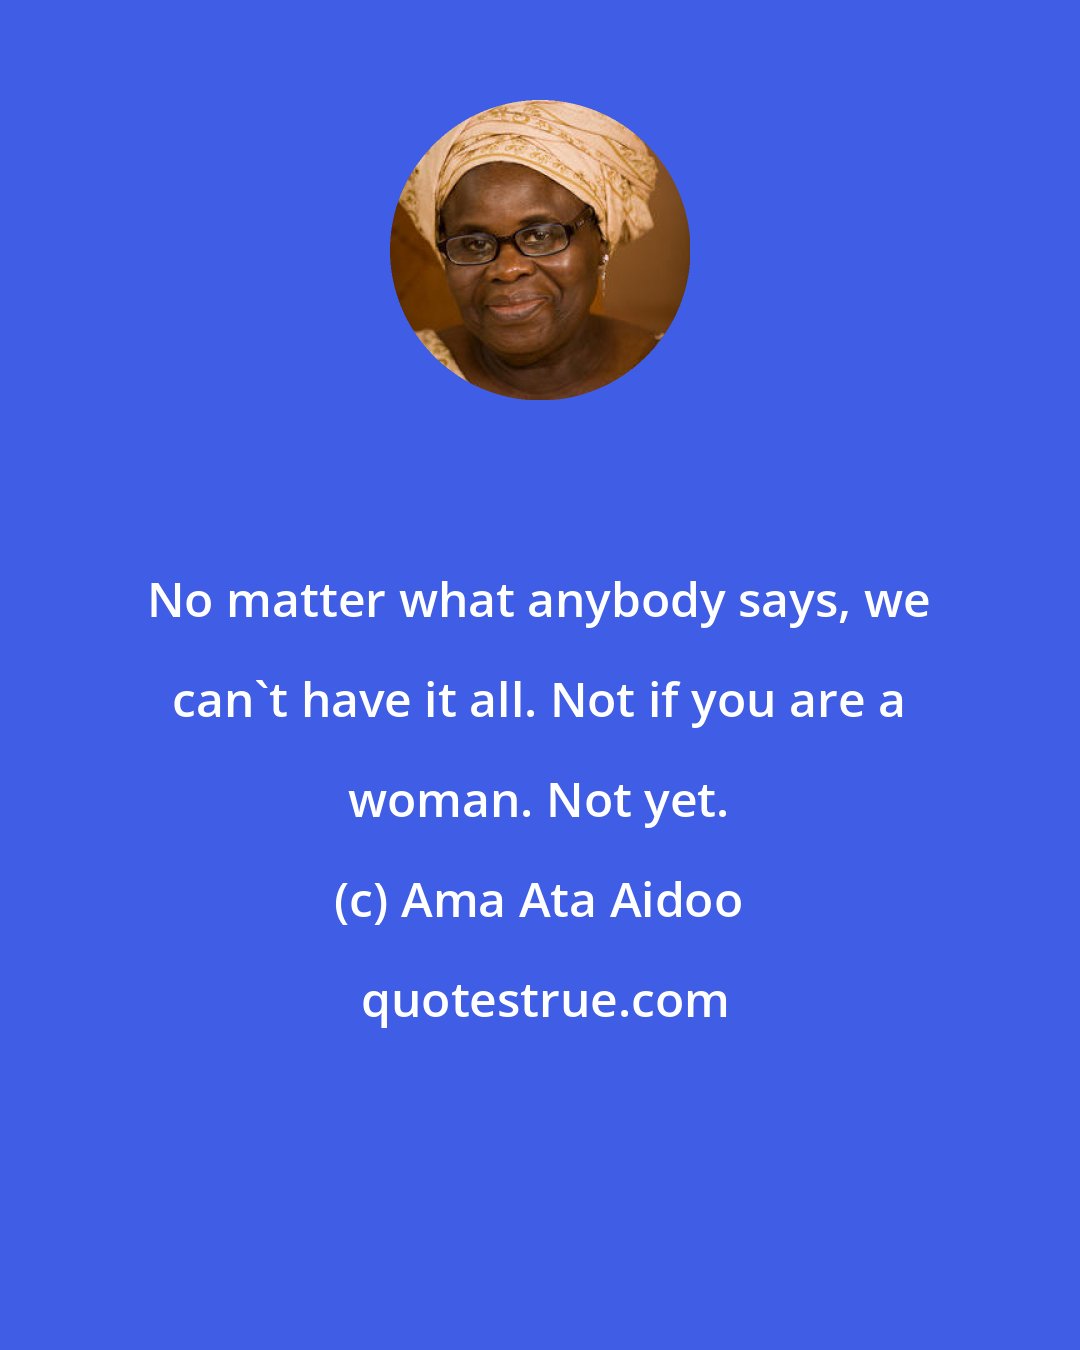 Ama Ata Aidoo: No matter what anybody says, we can't have it all. Not if you are a woman. Not yet.